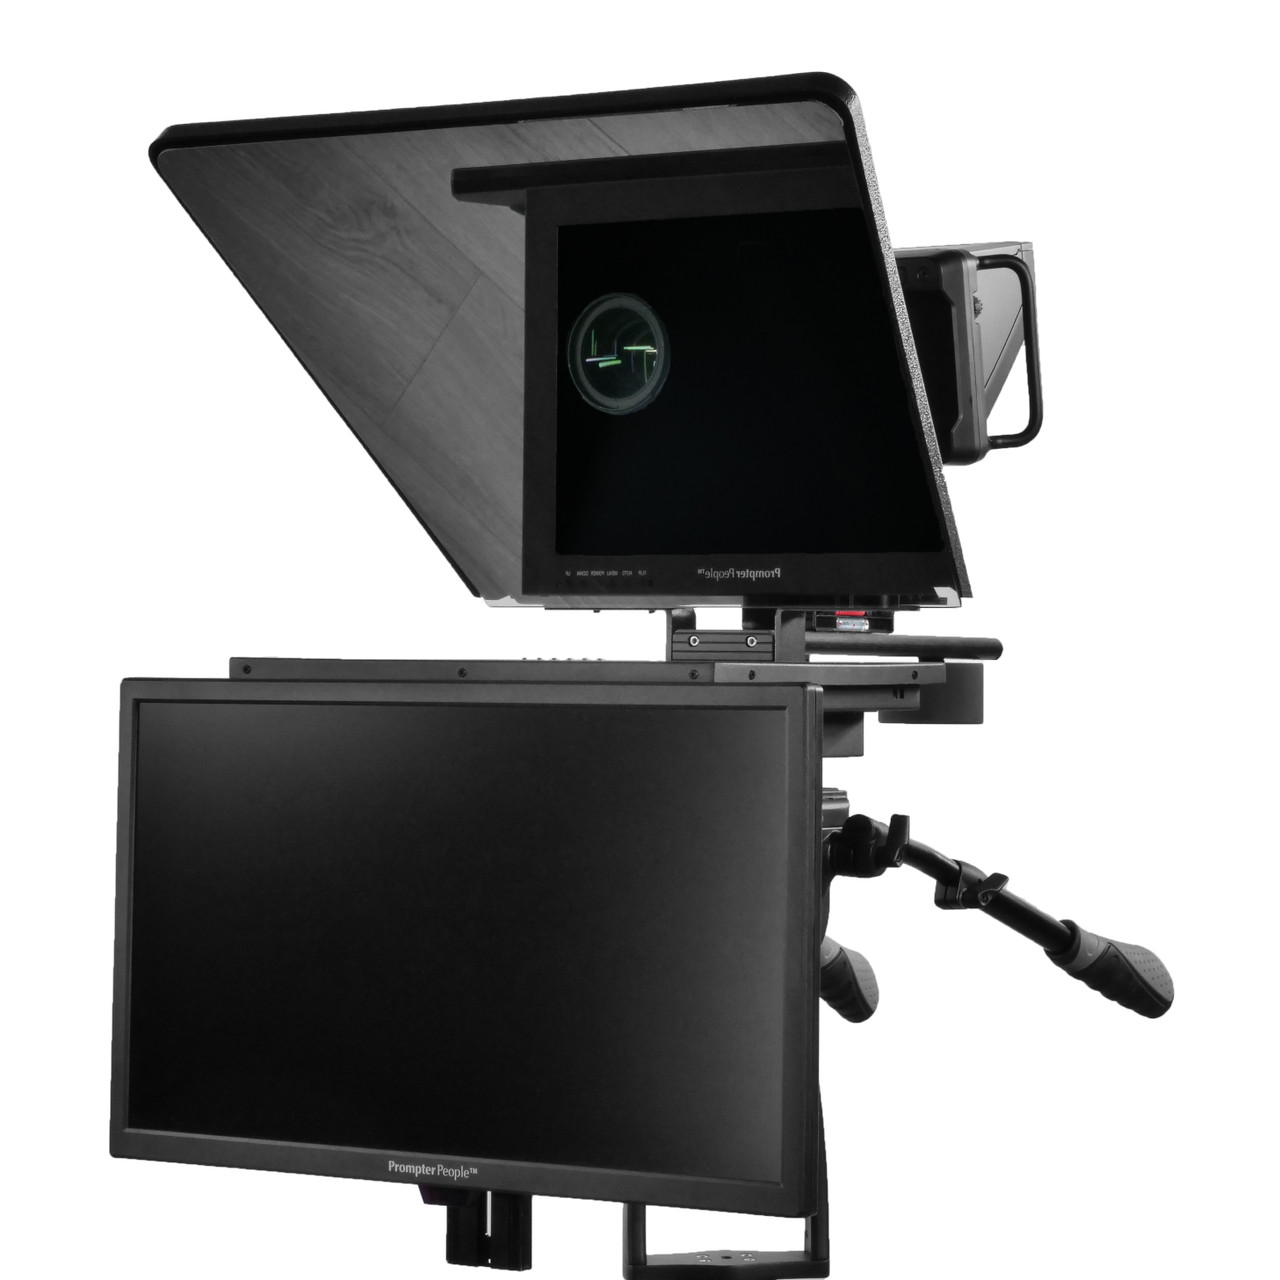 Flex Plus Talent Monitor Teleprompter | 17" 400 NIT Regular Prompting Monitor HDMI | VGA with 21.5" Color Accurate RGB IPS 3G-SDI Talent Monitor